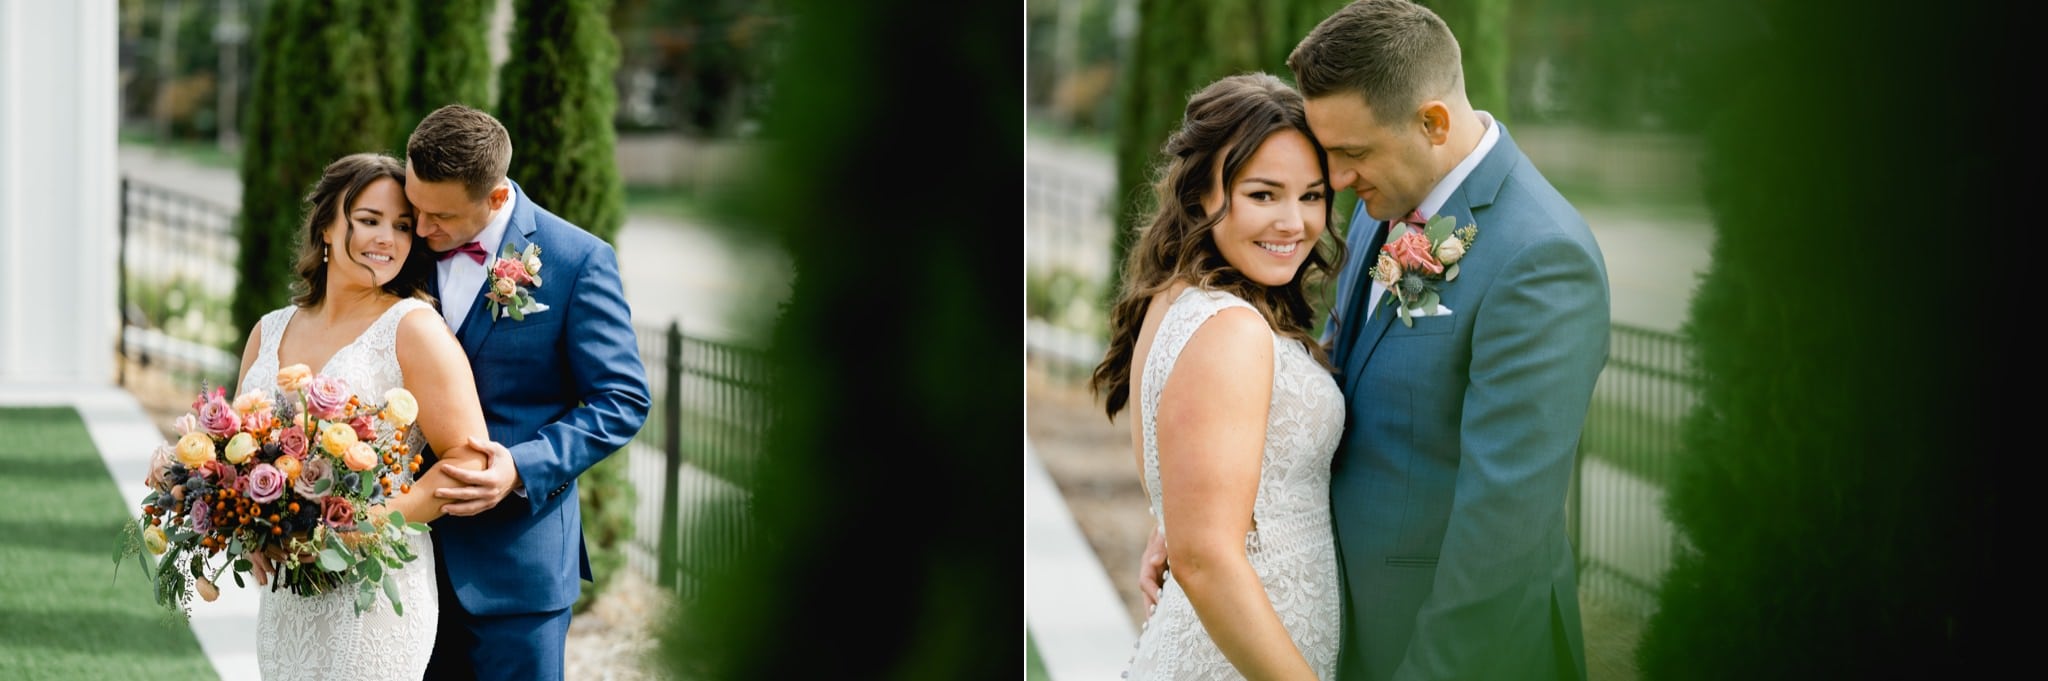 bride and groom portraits in des moines